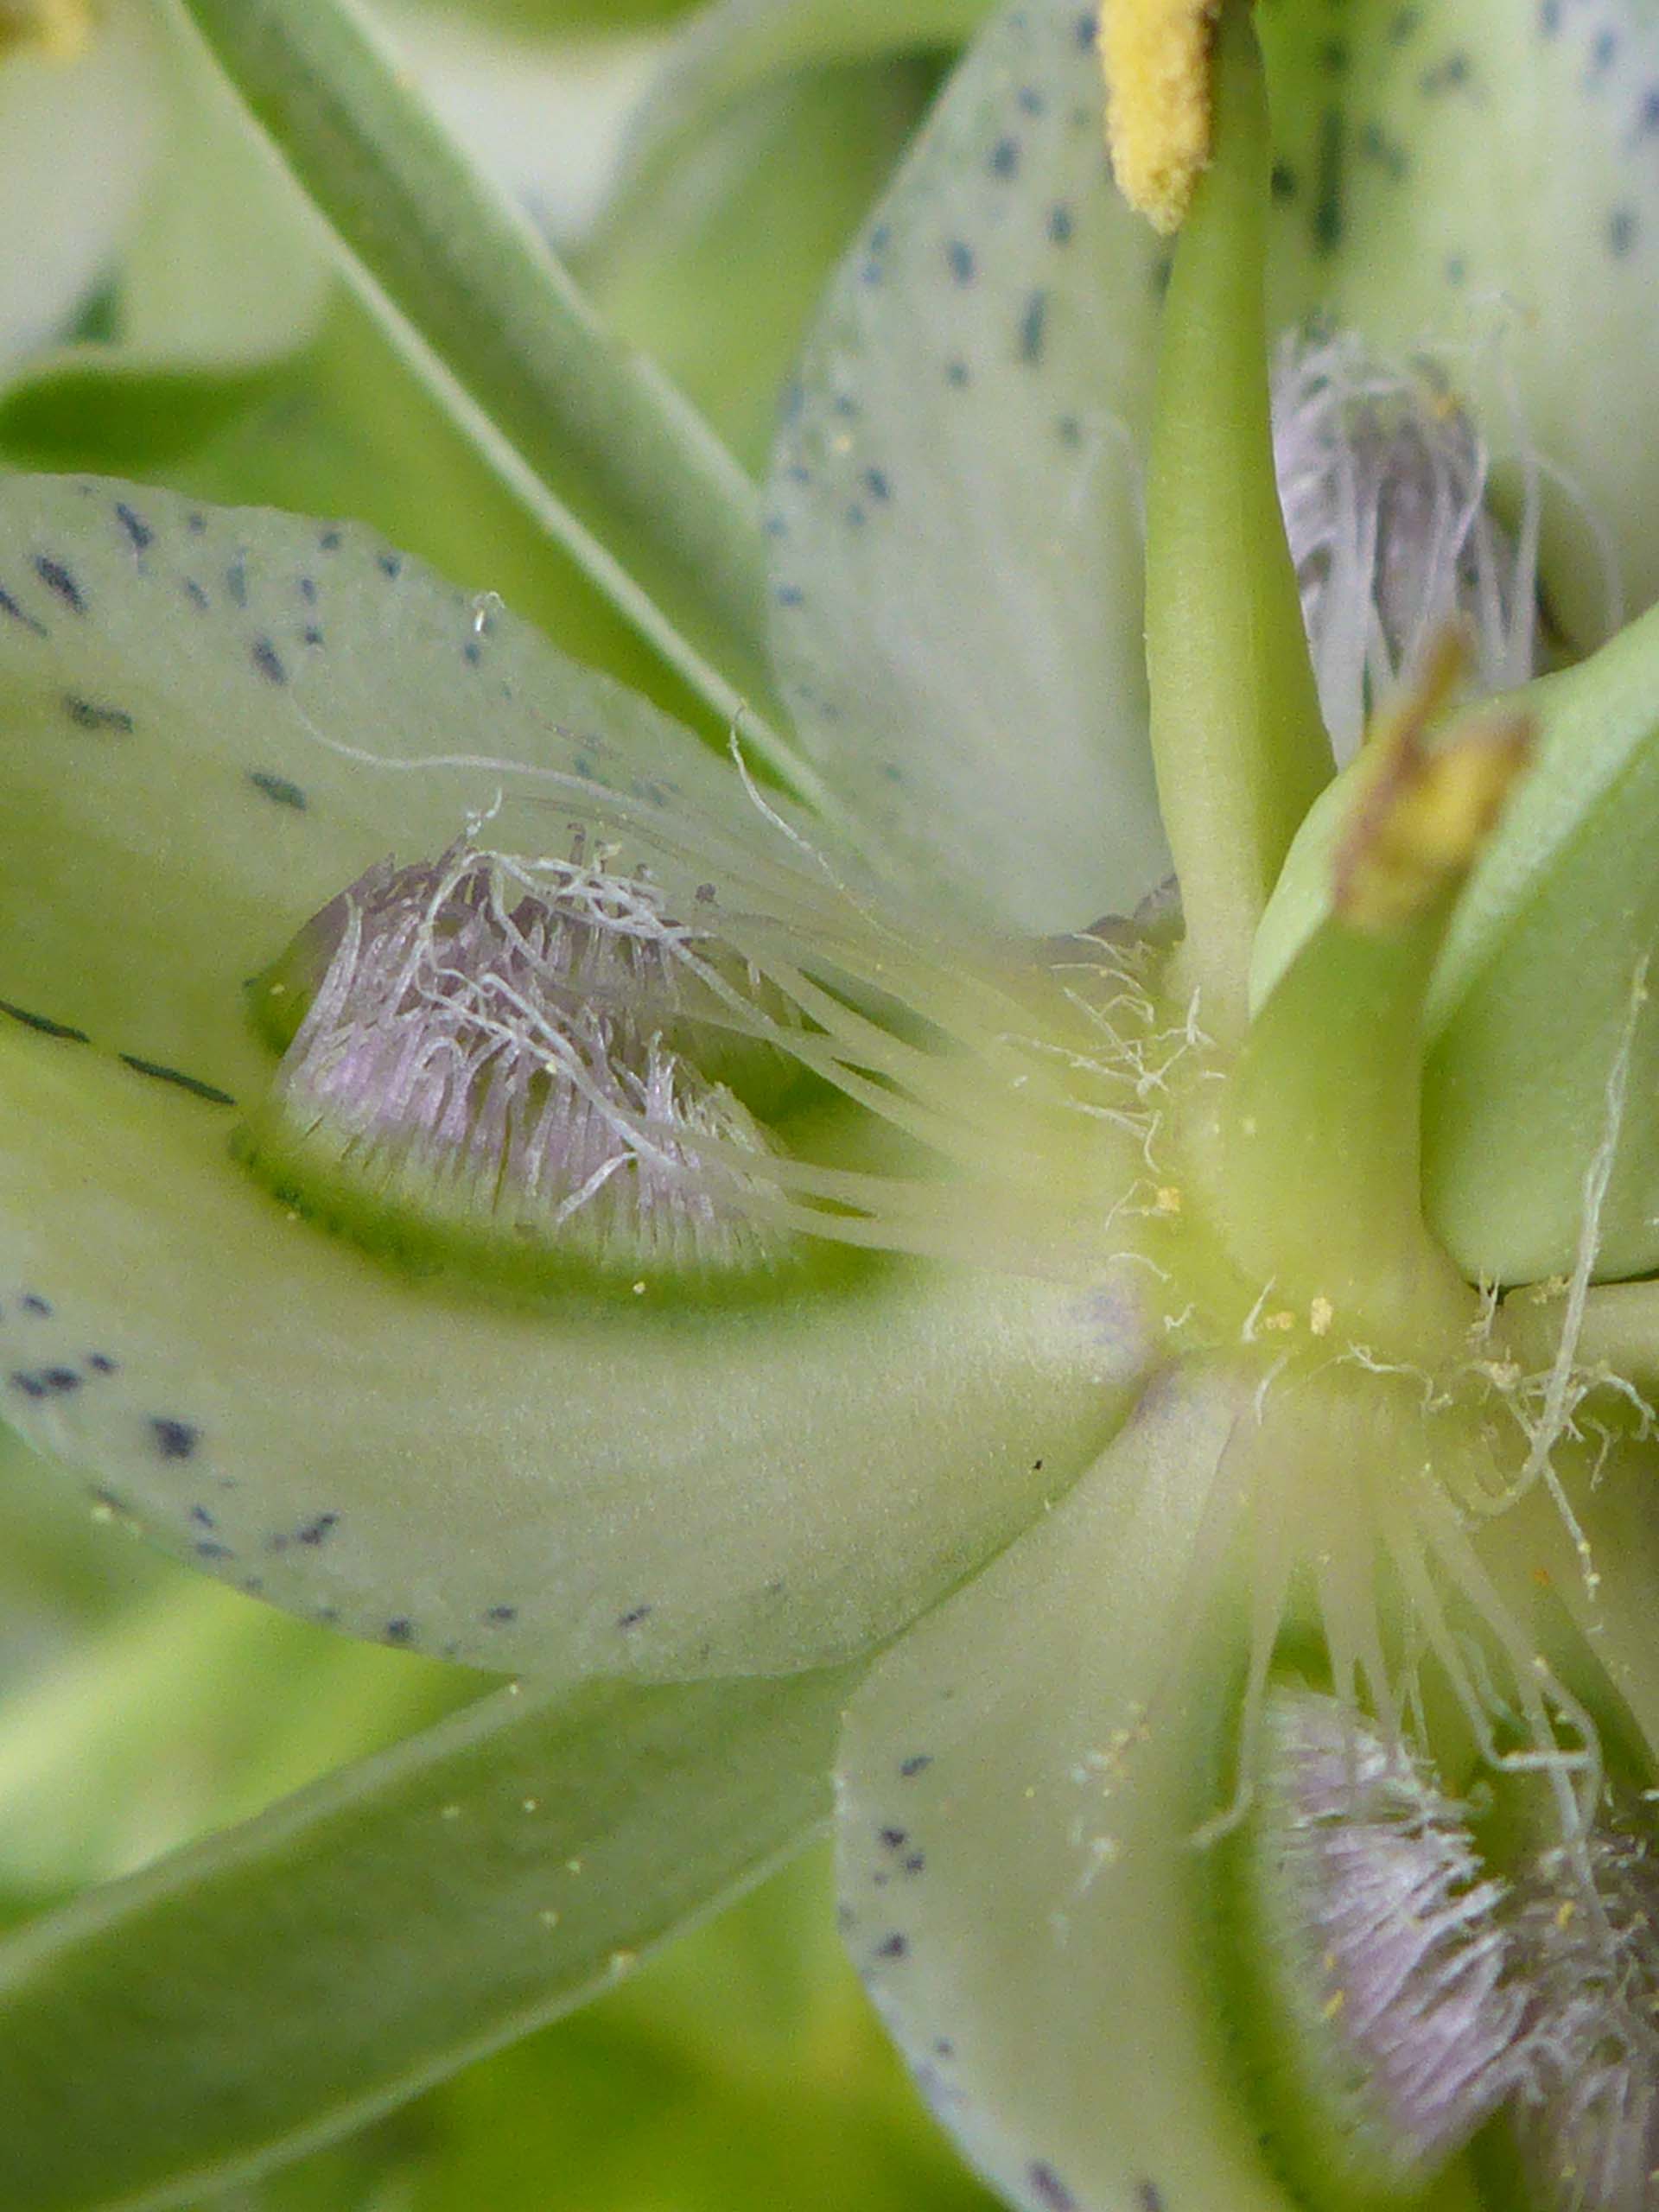 Close-up of nectary pits on petals of monument plant flower. D. Burk.